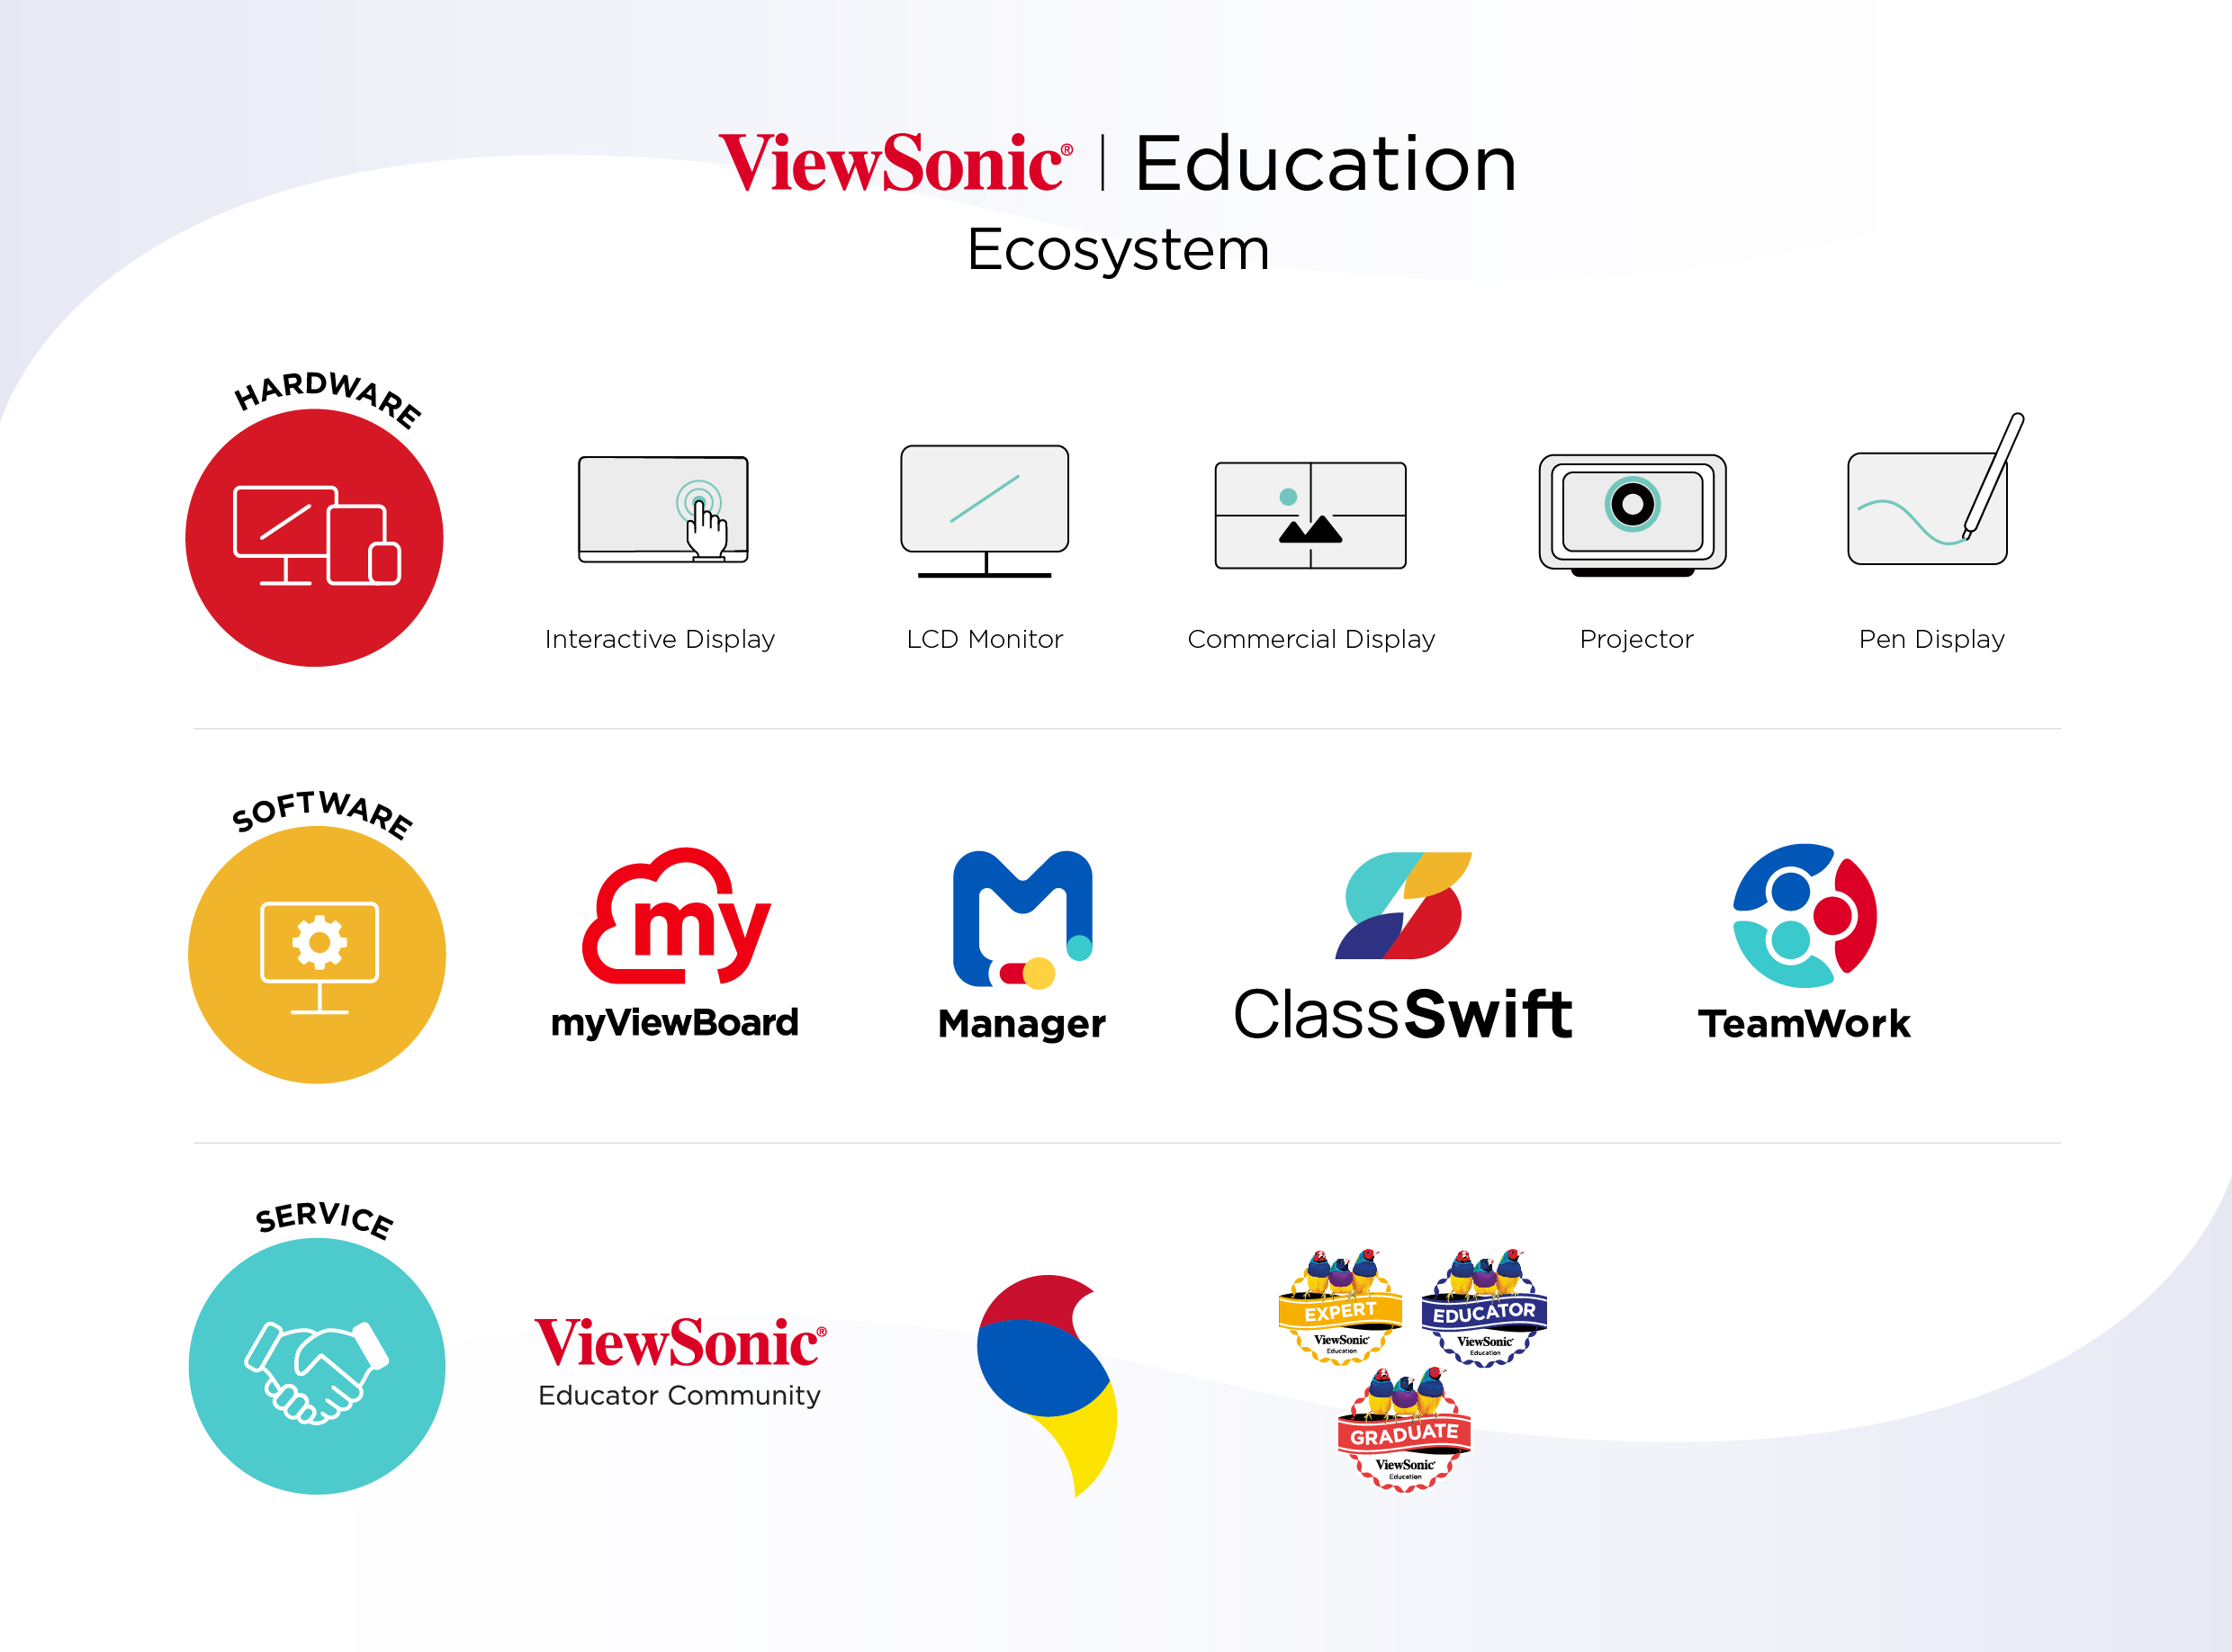 ViewSonic Education Ecosystem solutions encompass hardware, software, and services.